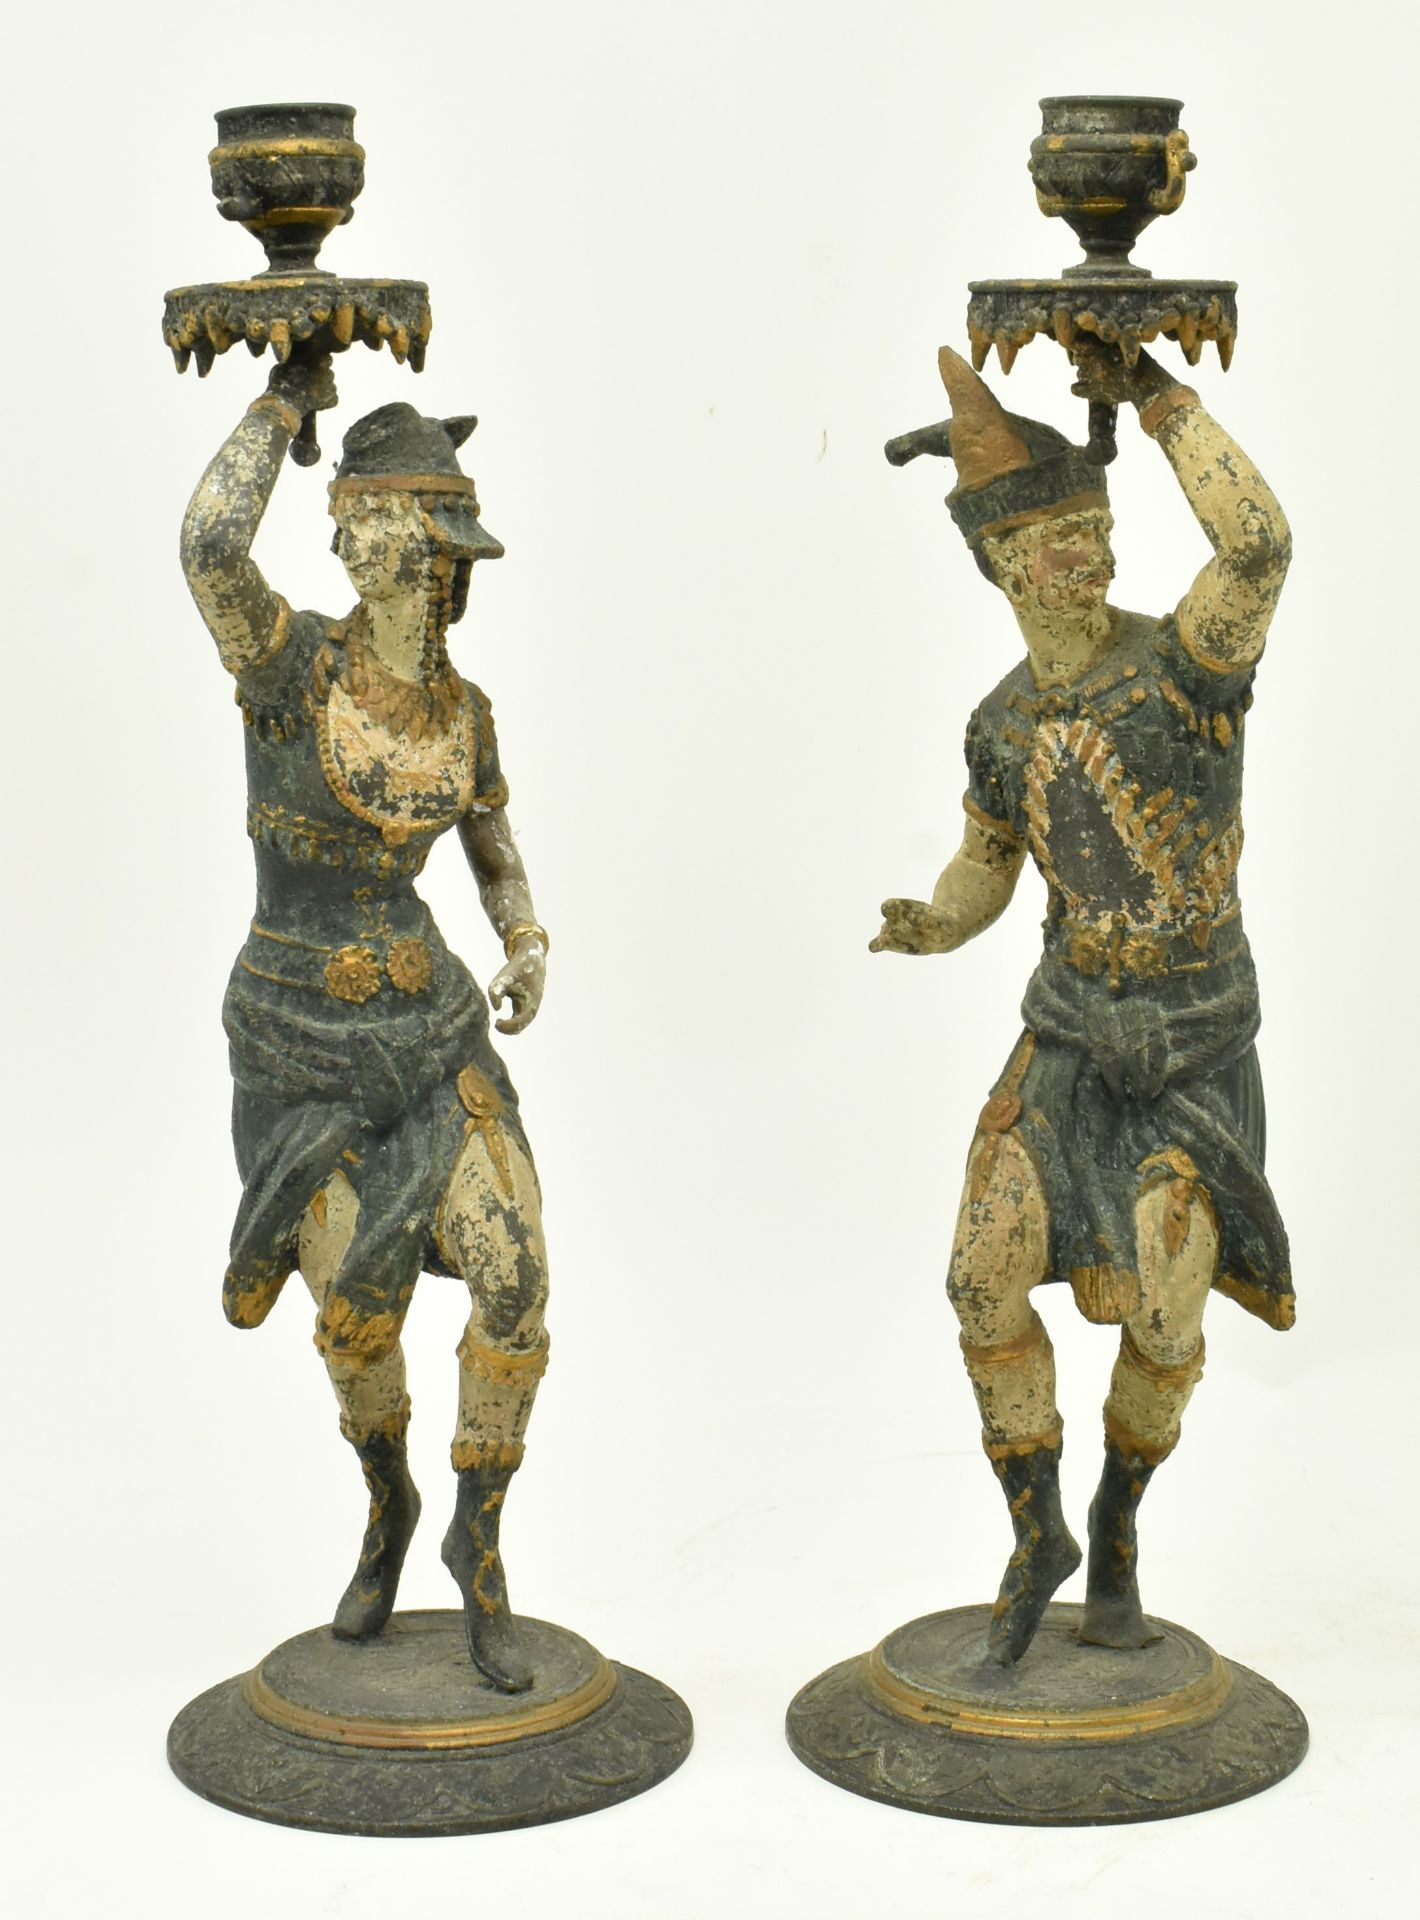 PAIR OF 19TH CENTURY FIGURATIVE SPELTER CANDLE-HOLDERS